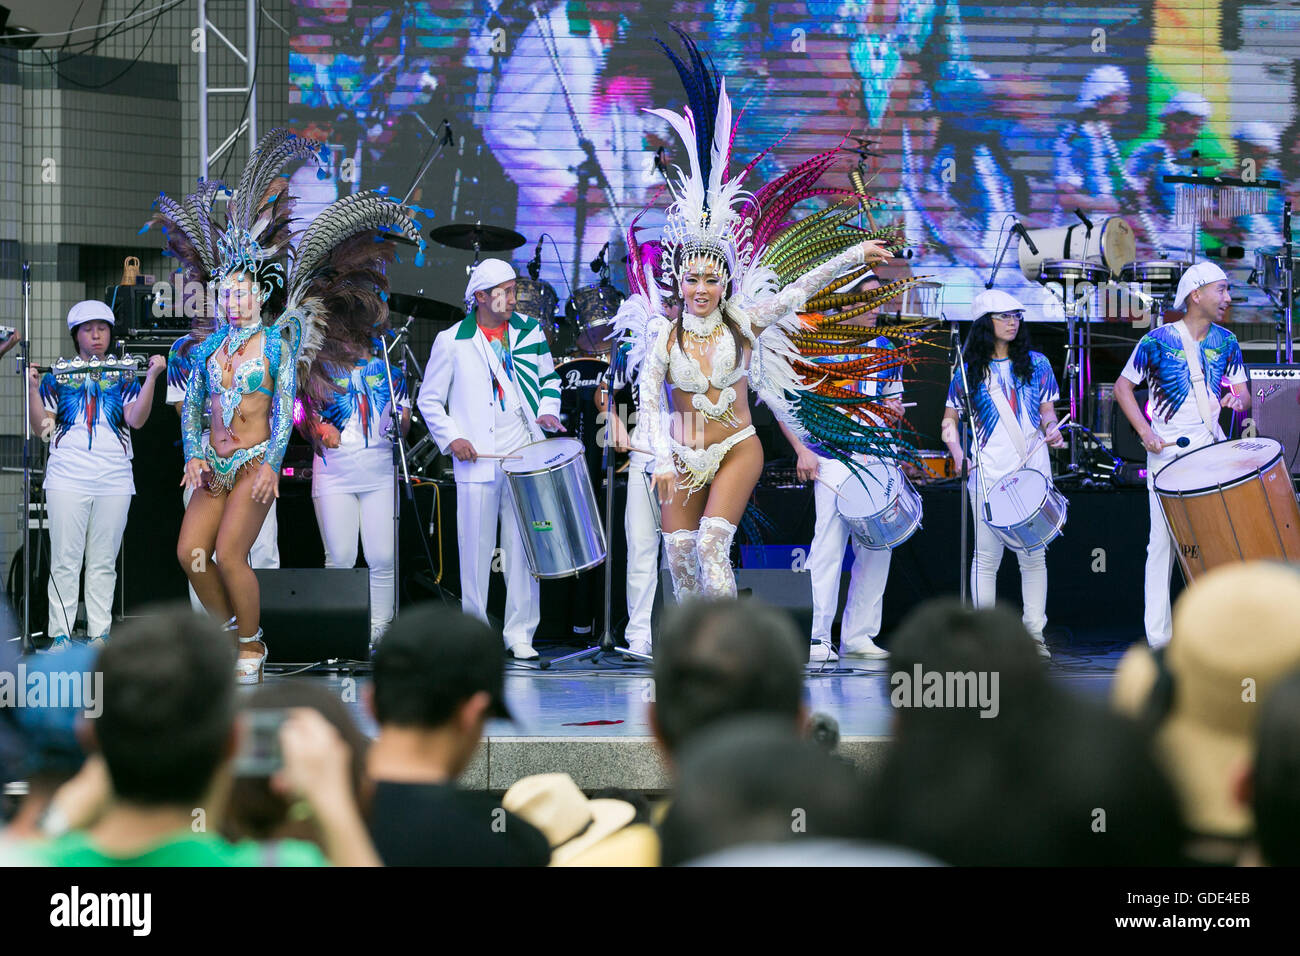 Tokyo, Japan. 16th July, 2016. Samba dancers perform at the Festival Brasil 2016 at Yoyogi Park on July 16, 2016, Tokyo, Japan. The annual festival brings together Brazilian food and entertainment including Samba and Capoeira performers. Organized by the Camara de Comercio Brasileira no Japao the event runs until July 17. The Brazilian community is the third largest immigrant population in Japan. Credit:  Rodrigo Reyes Marin/AFLO/Alamy Live News Stock Photo